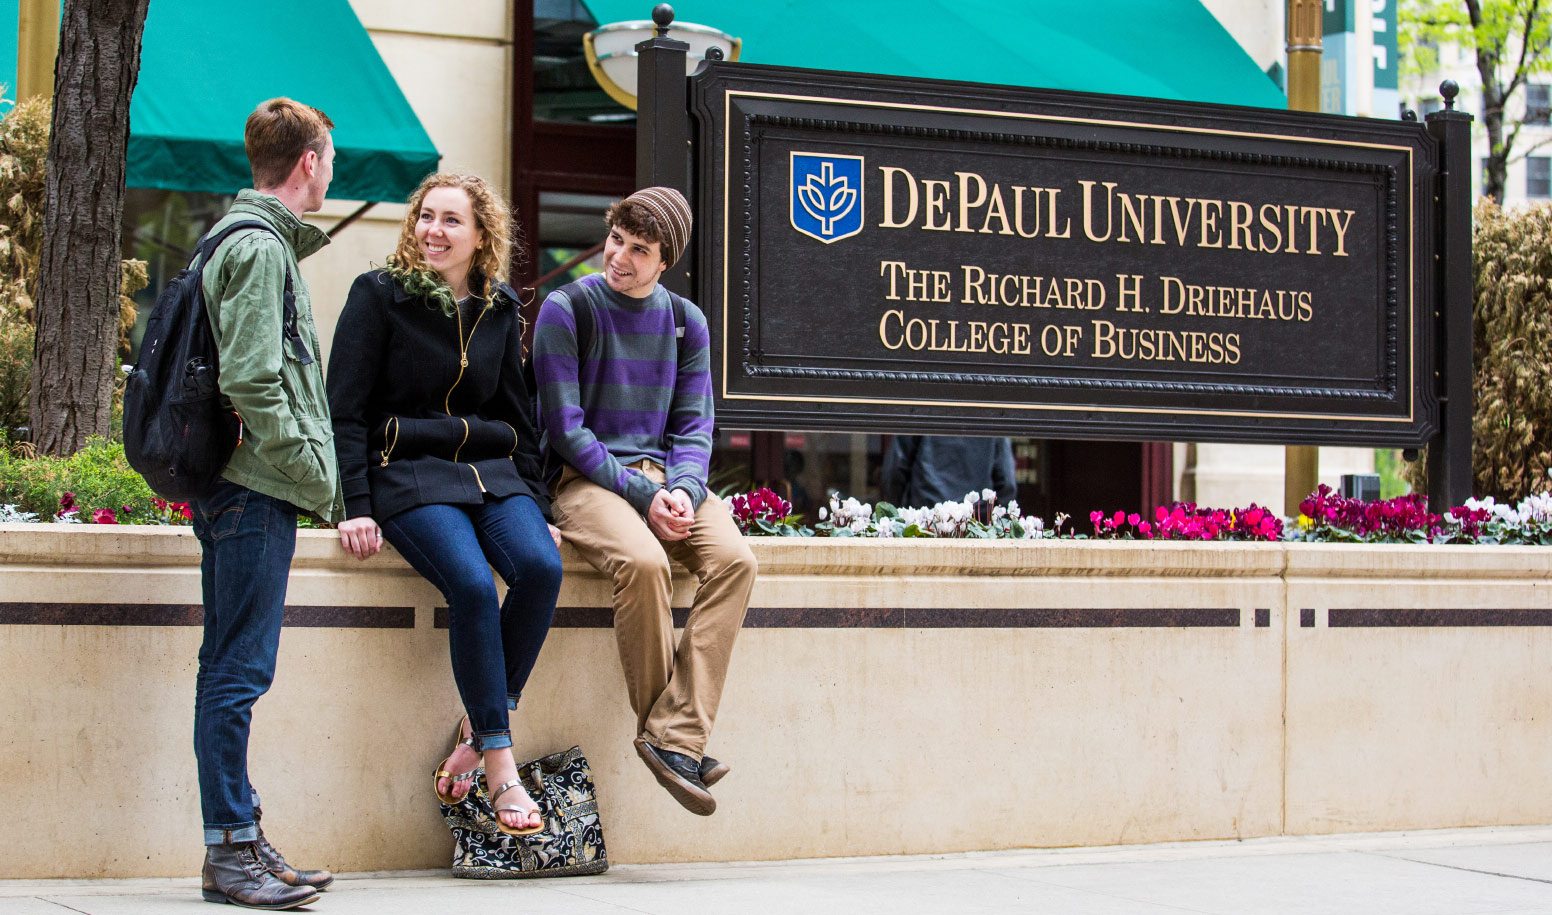 Students sitting near Driehaus College of Business sign